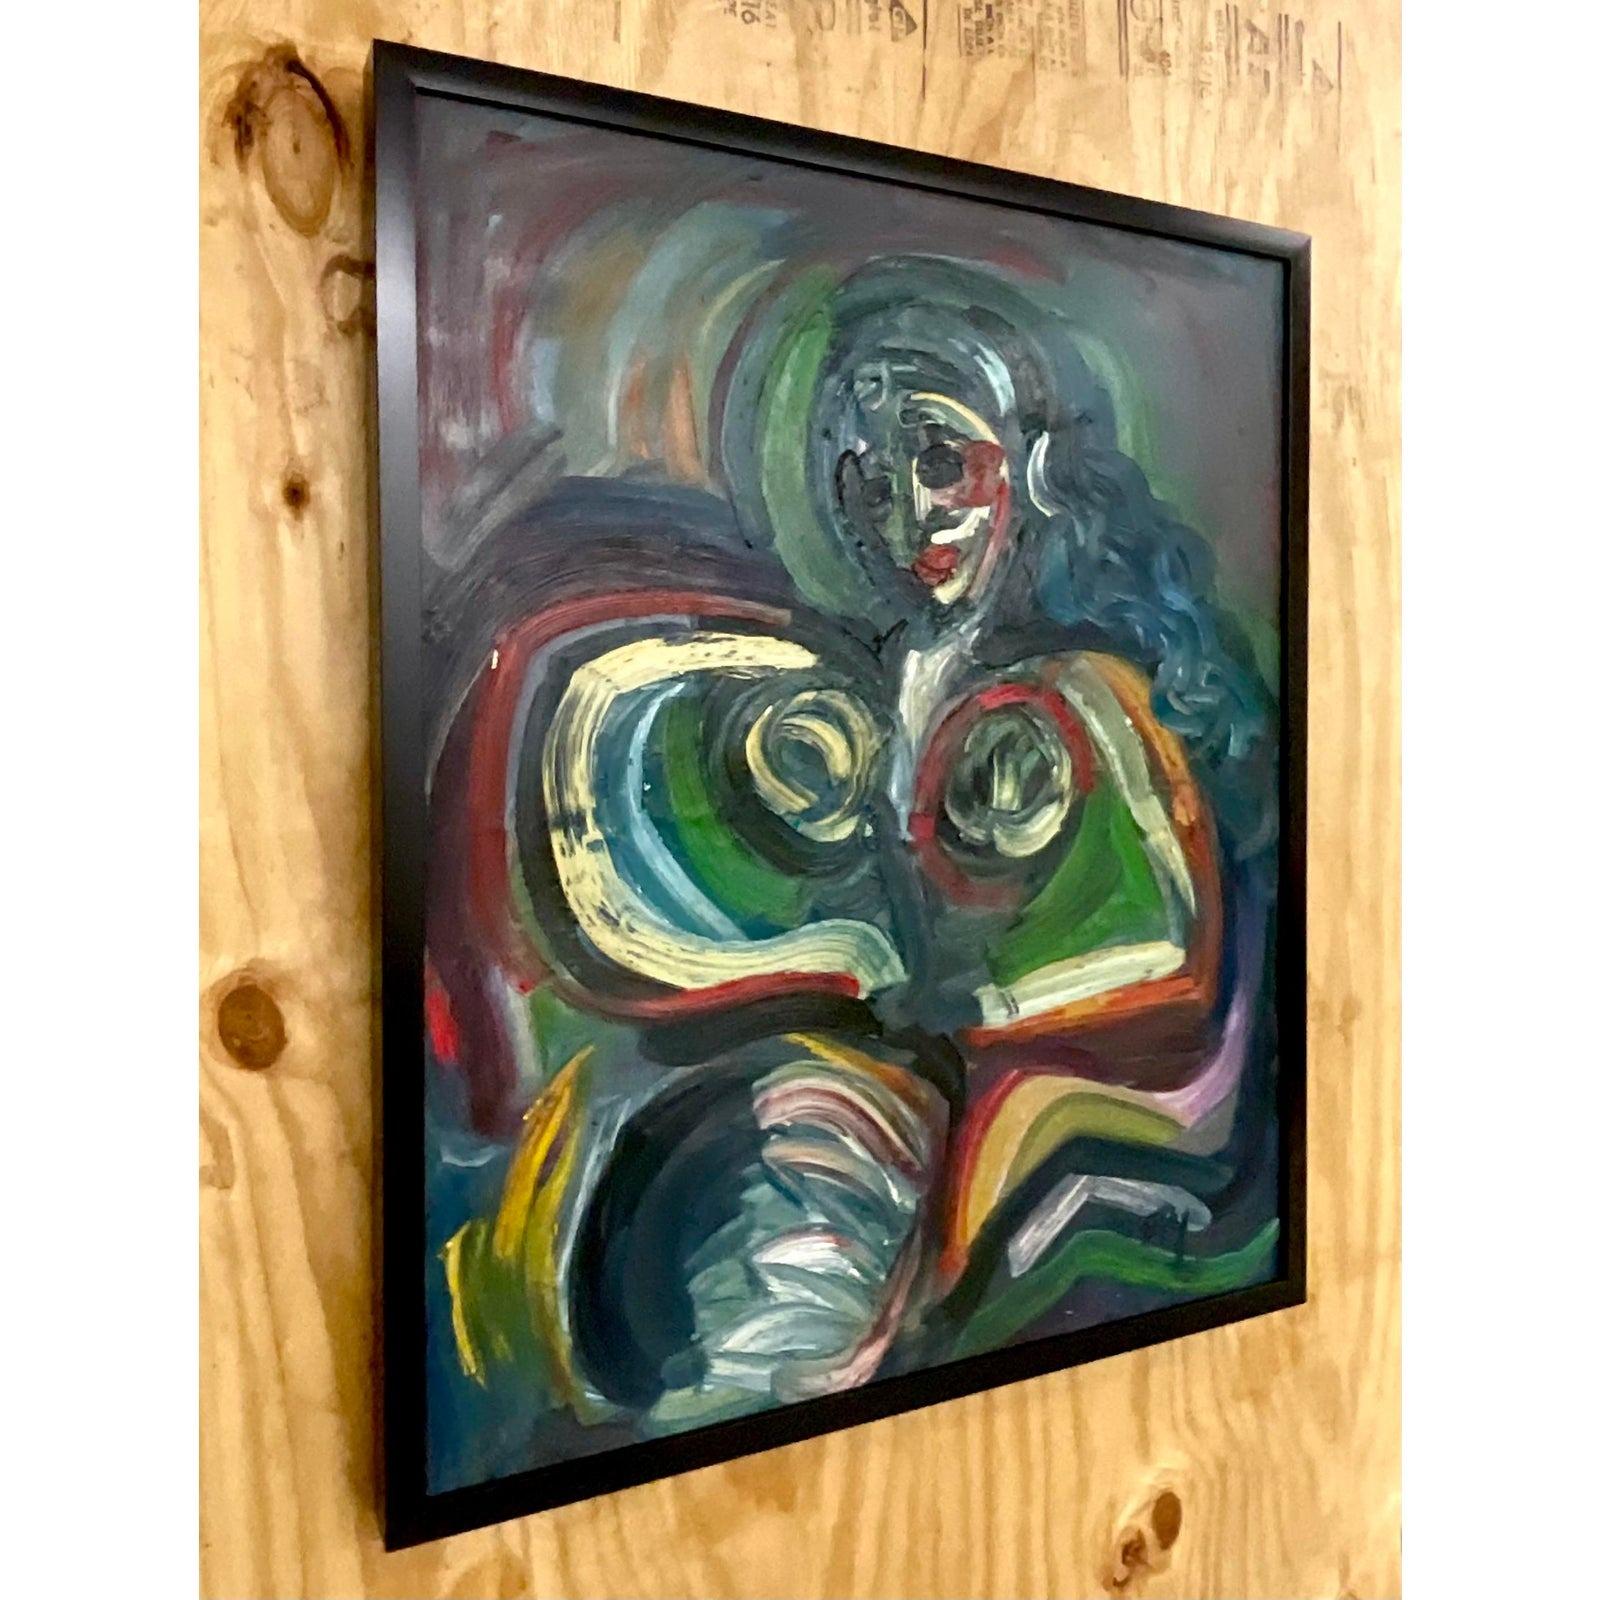 A fabulous vintage Boho original oil painting. A chic impasto style female nude in deep rich color. Signed by the artist Frid. A striking composition. Acquired from a Palm Beach estate